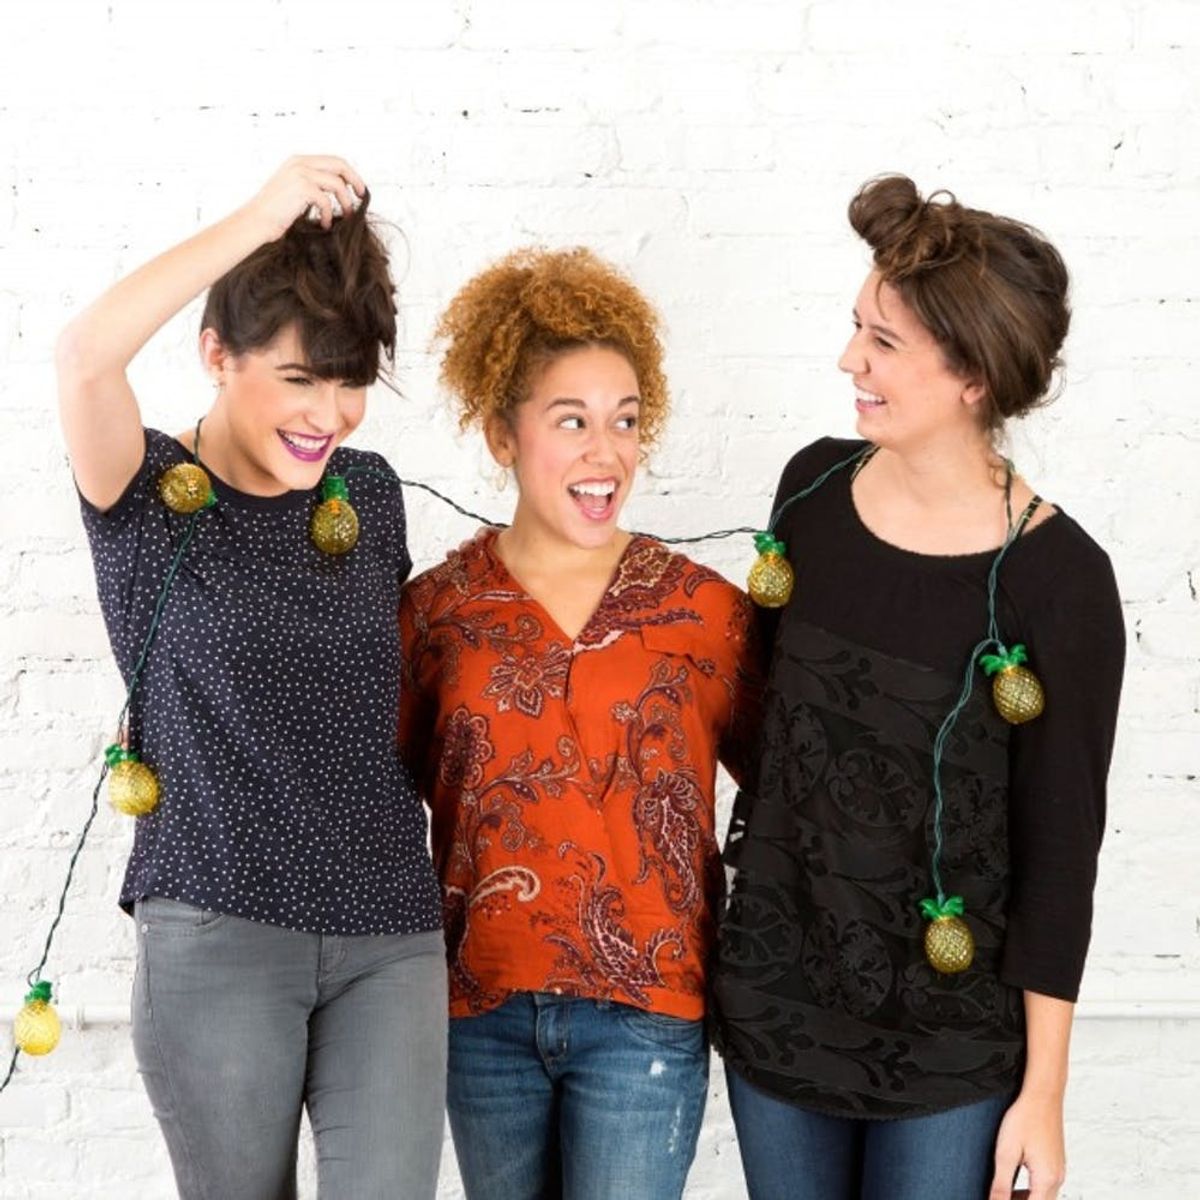 What Happened When 3 Women With Totally Different Hair Types Tried Pineappling